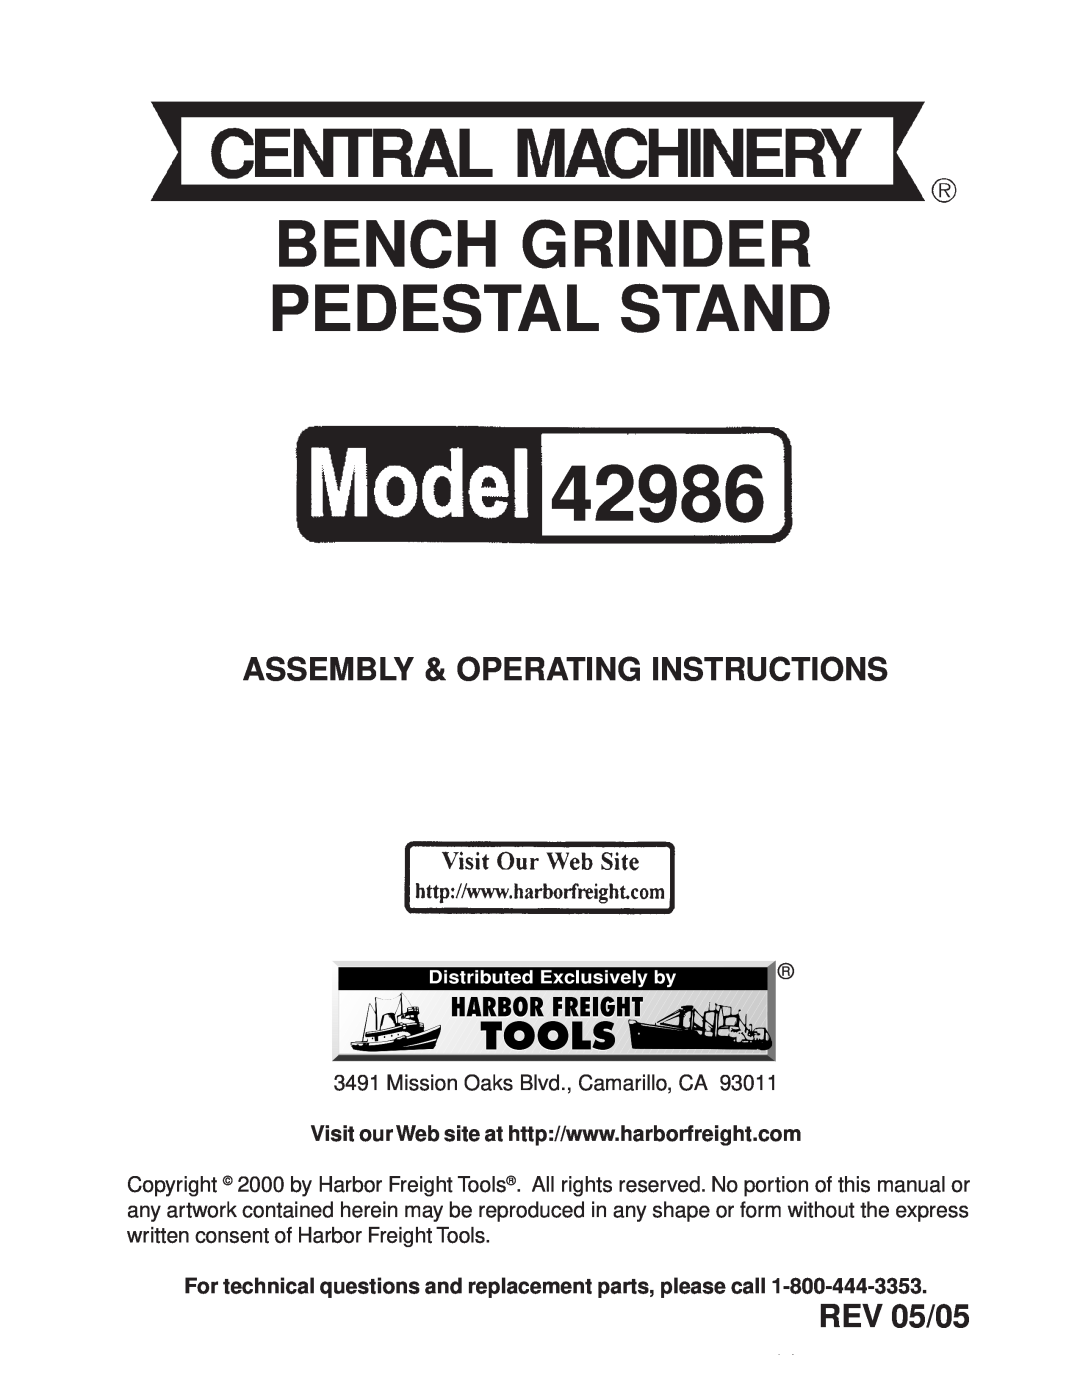 Harbor Freight Tools 42986 operating instructions For technical questions or replacement parts, please call, Model 